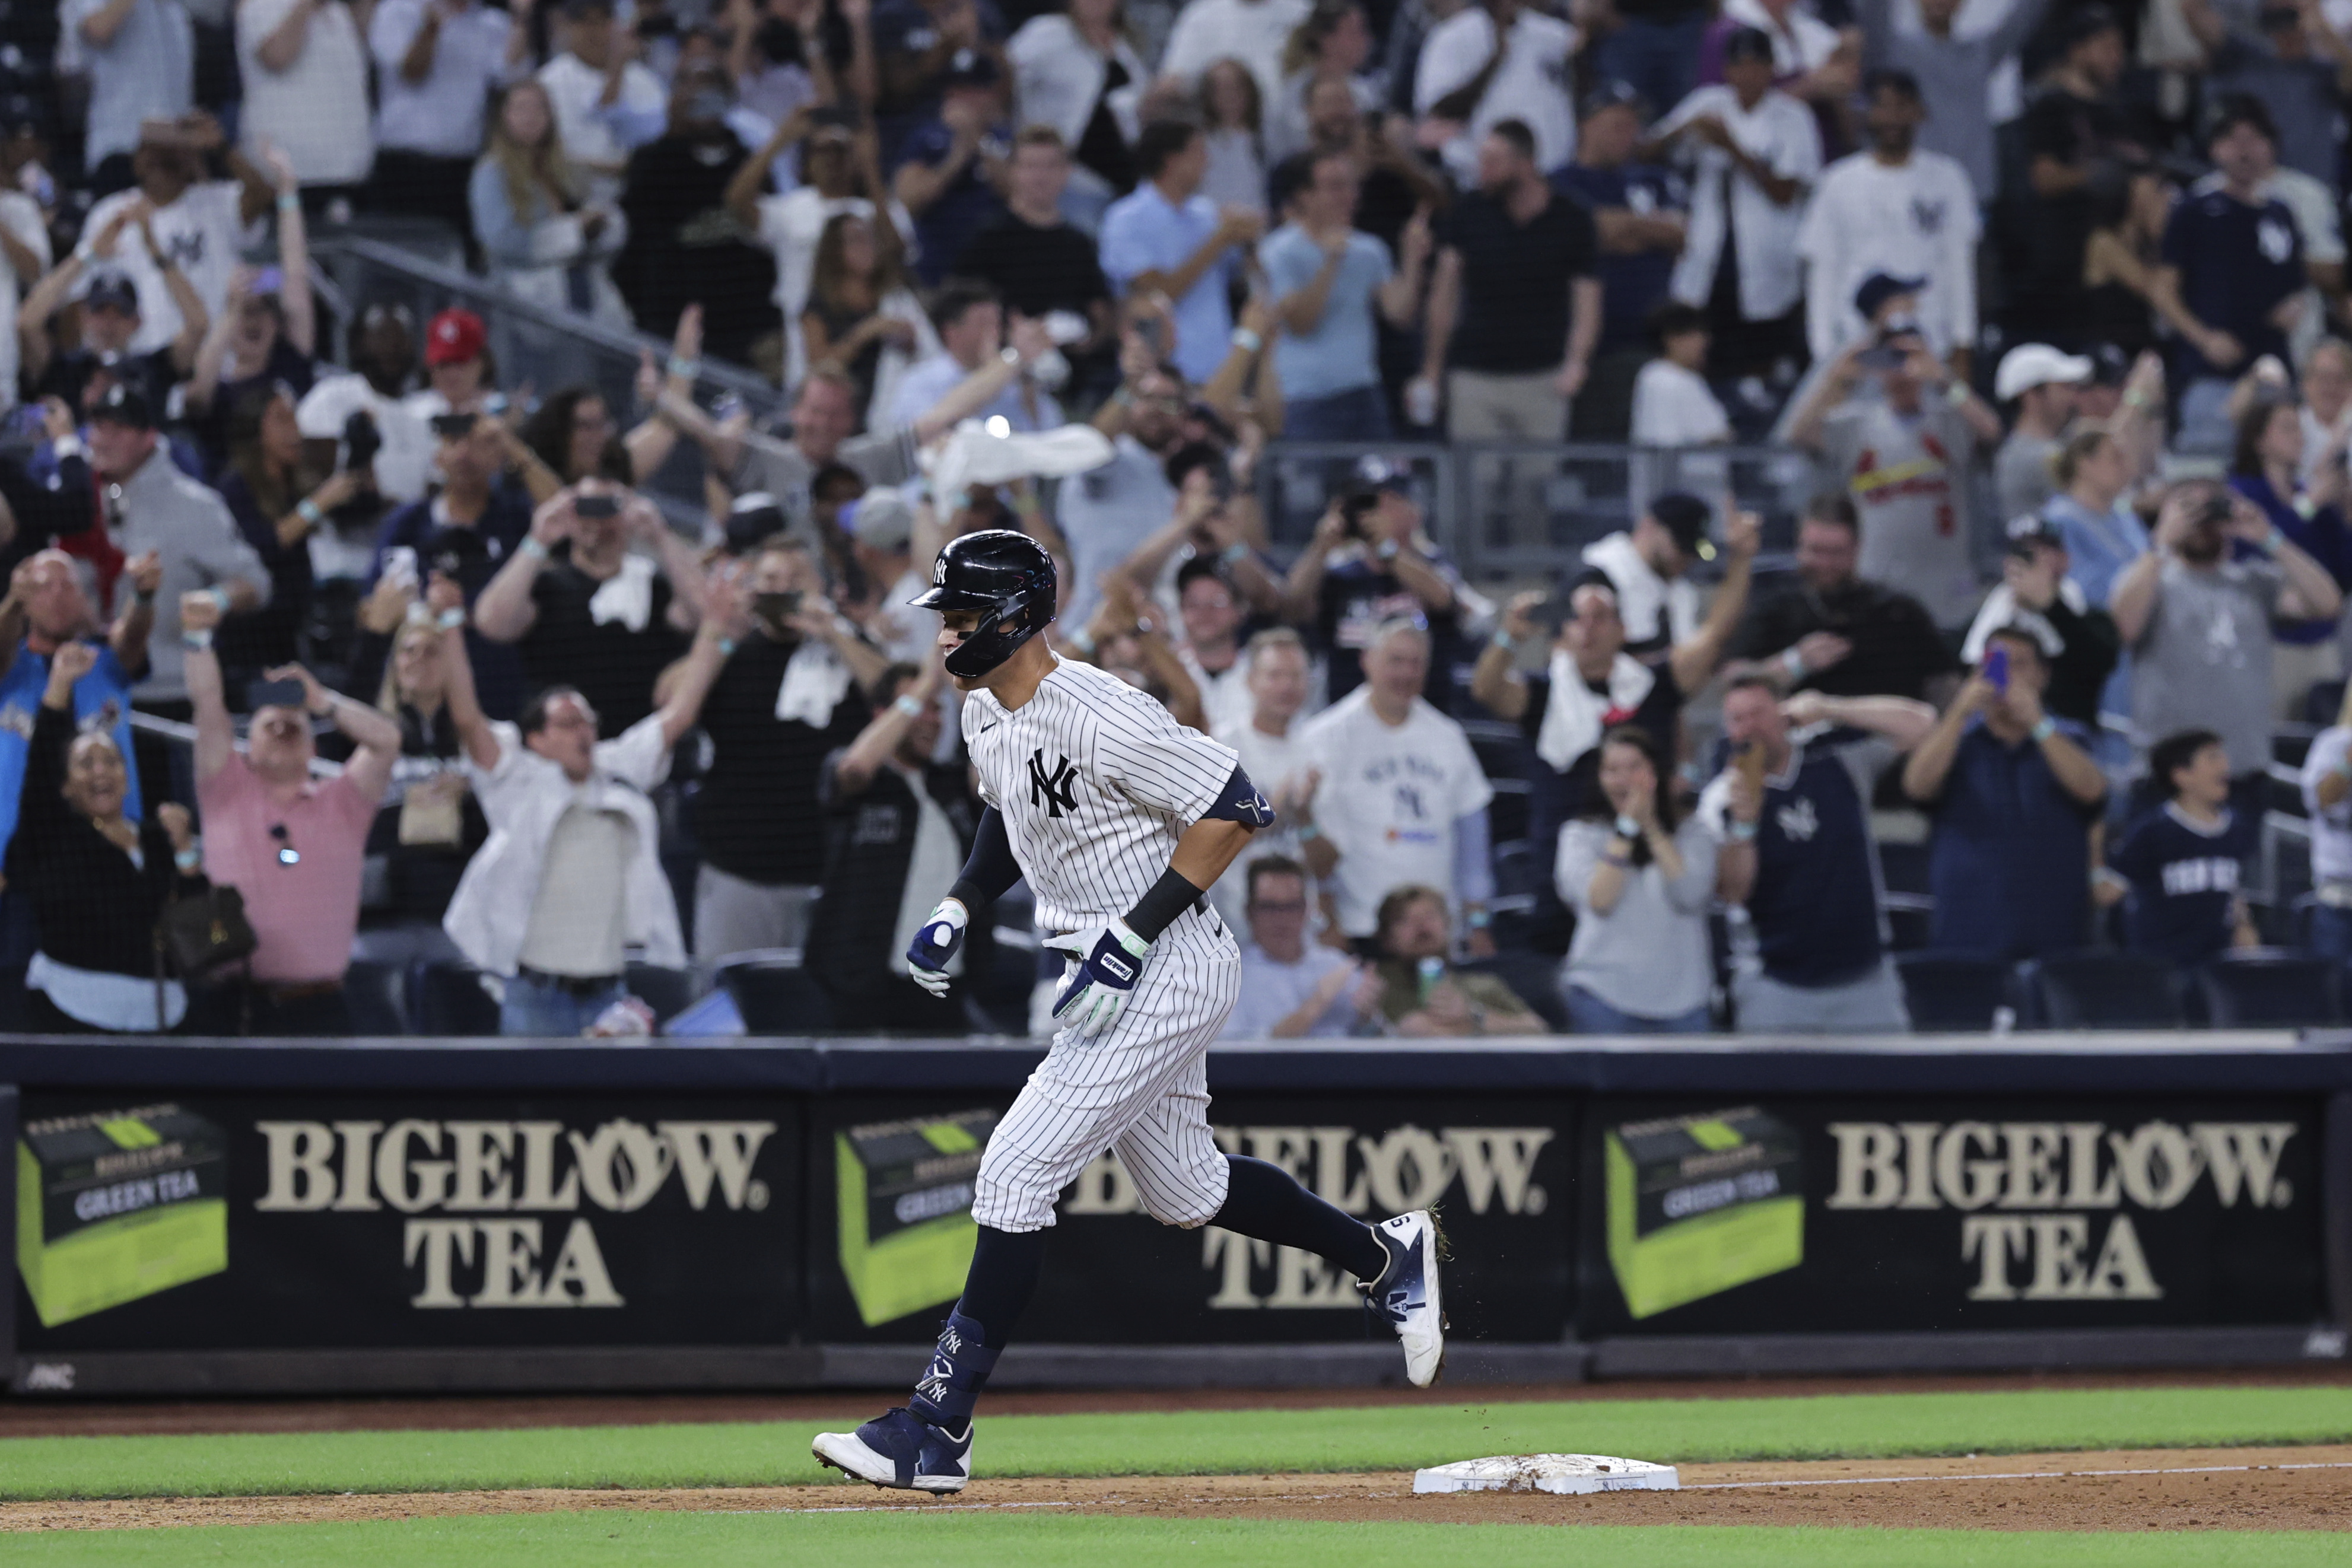 Aaron Judge's Home Run Derby win proves baseball has a new face